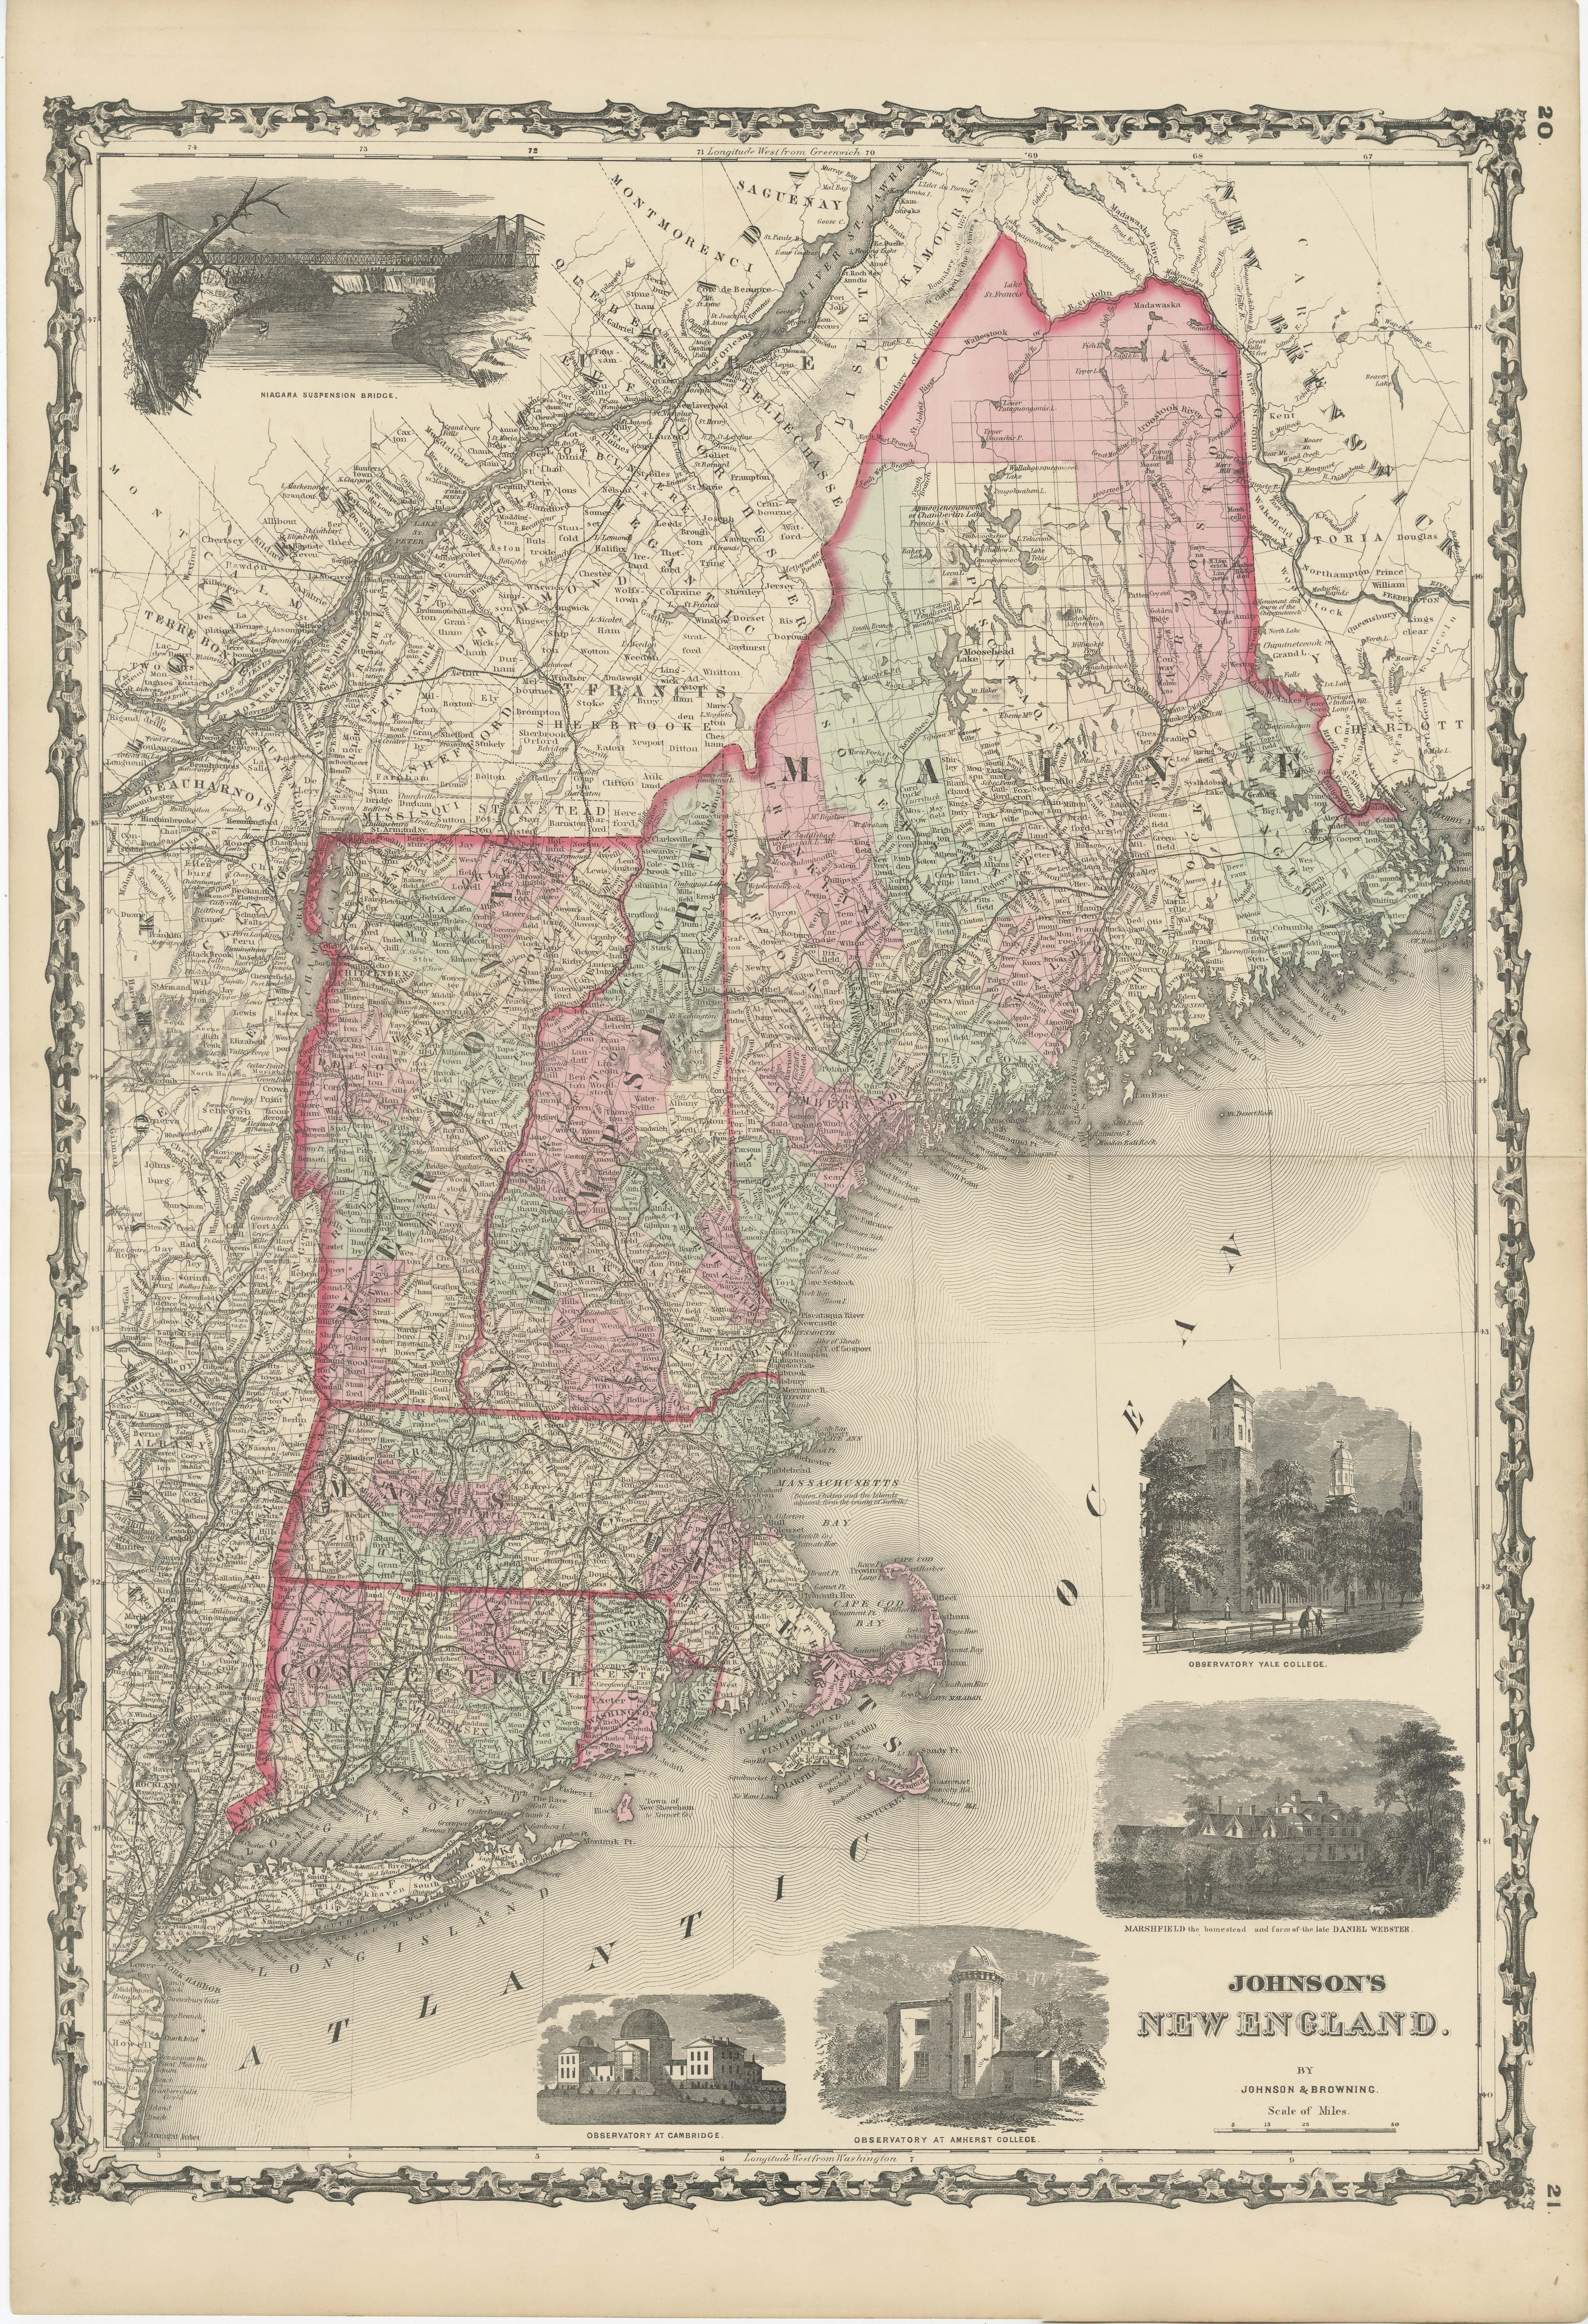 Antique map titled 'Johnson's New England'. Large map of New England, comprising the states Connecticut, Maine, Massachusetts, New Hampshire, Rhode Island, and Vermont. Complimented by several vignettes for the Niagara suspension bridge, several